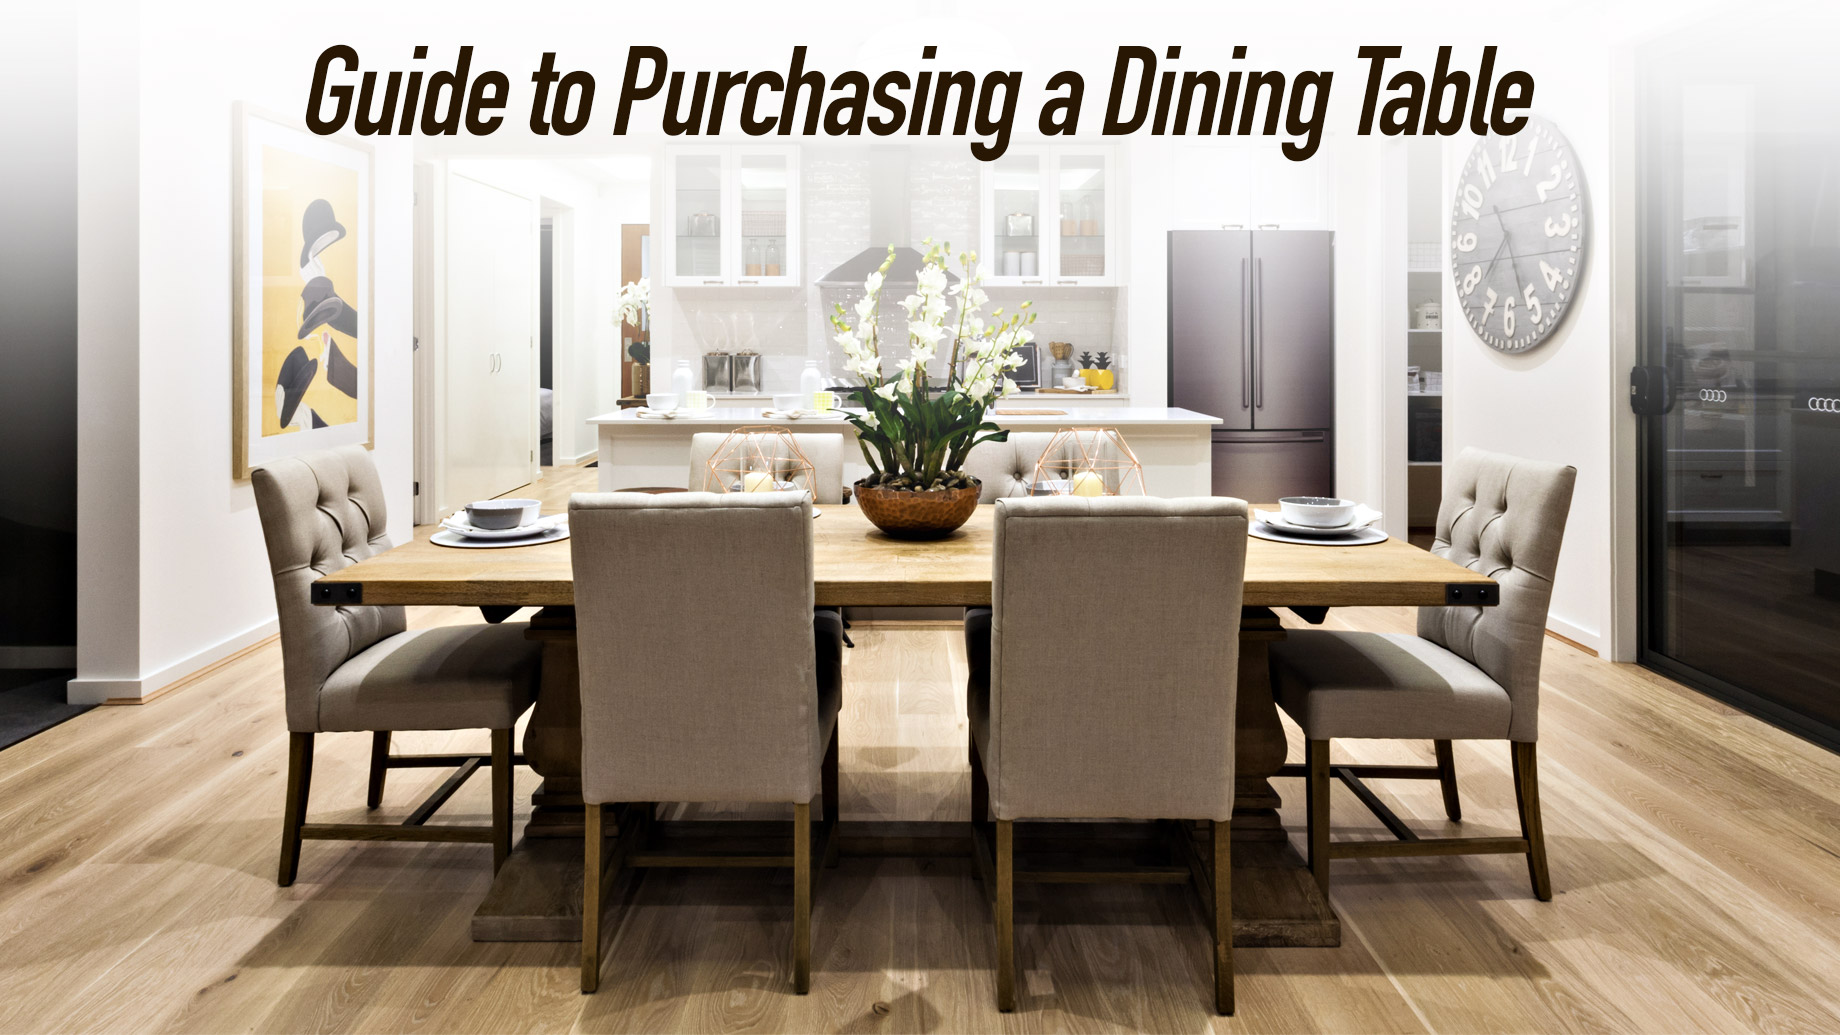 Guide to Purchasing a Dining Table